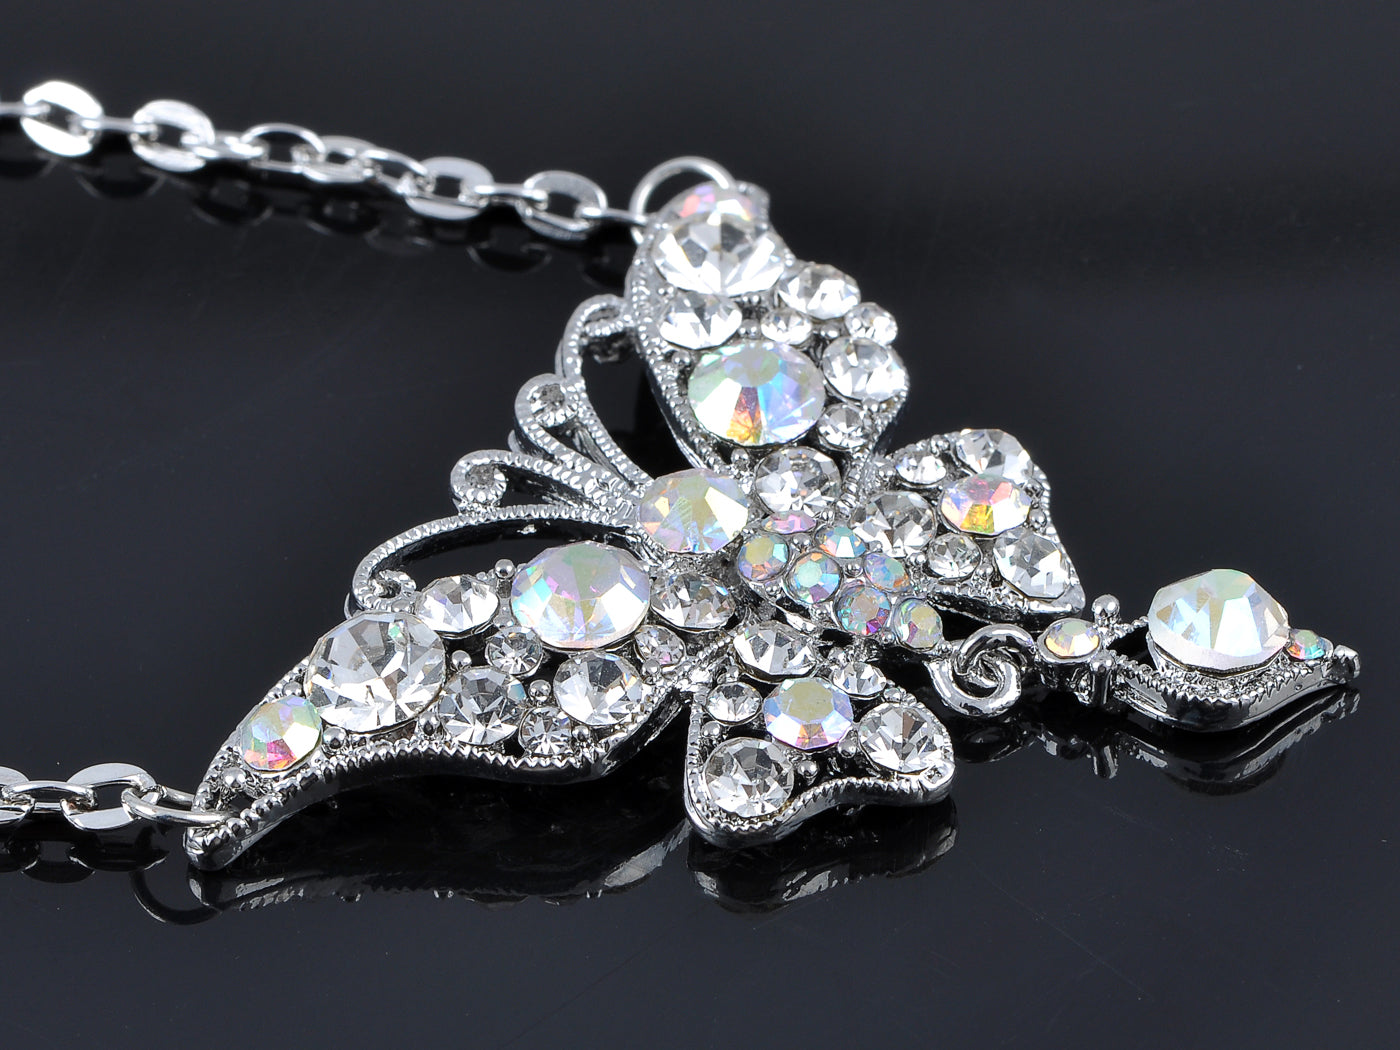 Royal Butterfly Dangle Ice Ab Collection Pendant Necklace